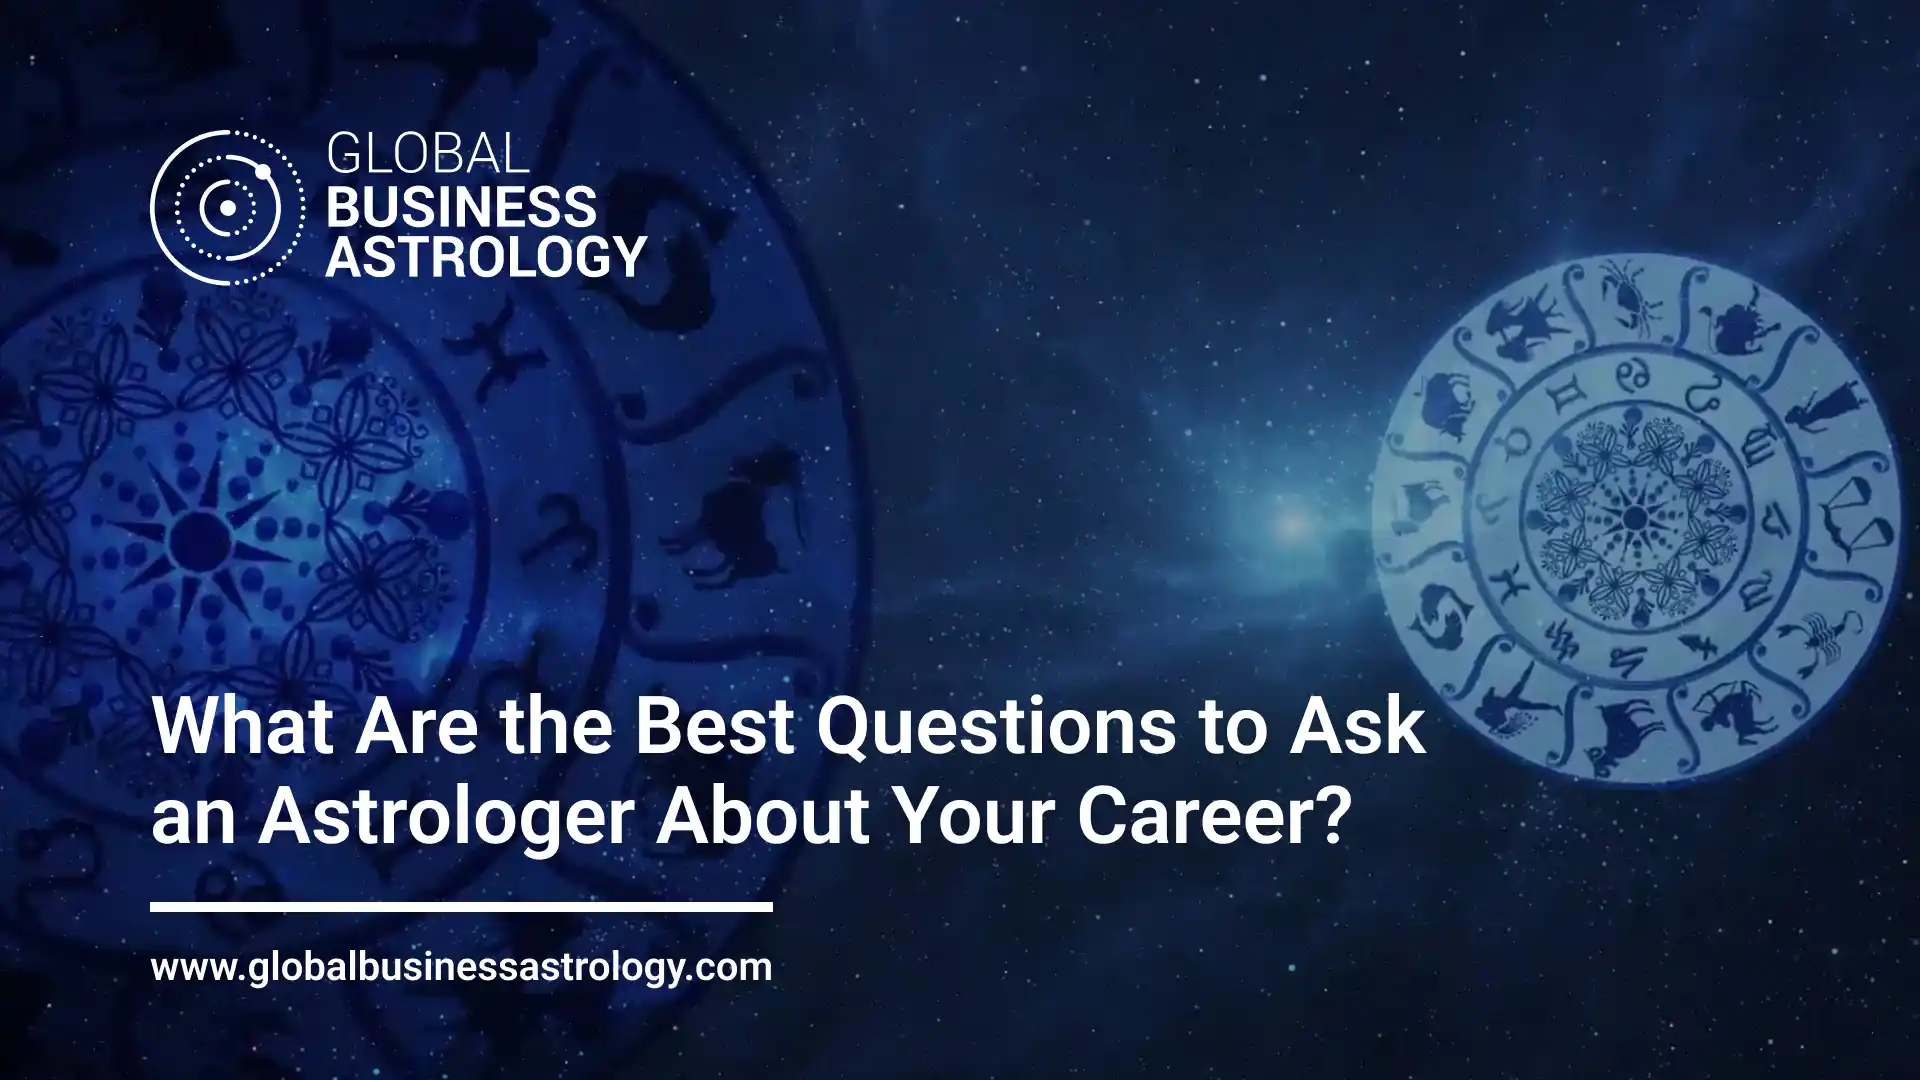 What Are the Best Questions to Ask an Astrologer About Your Career?